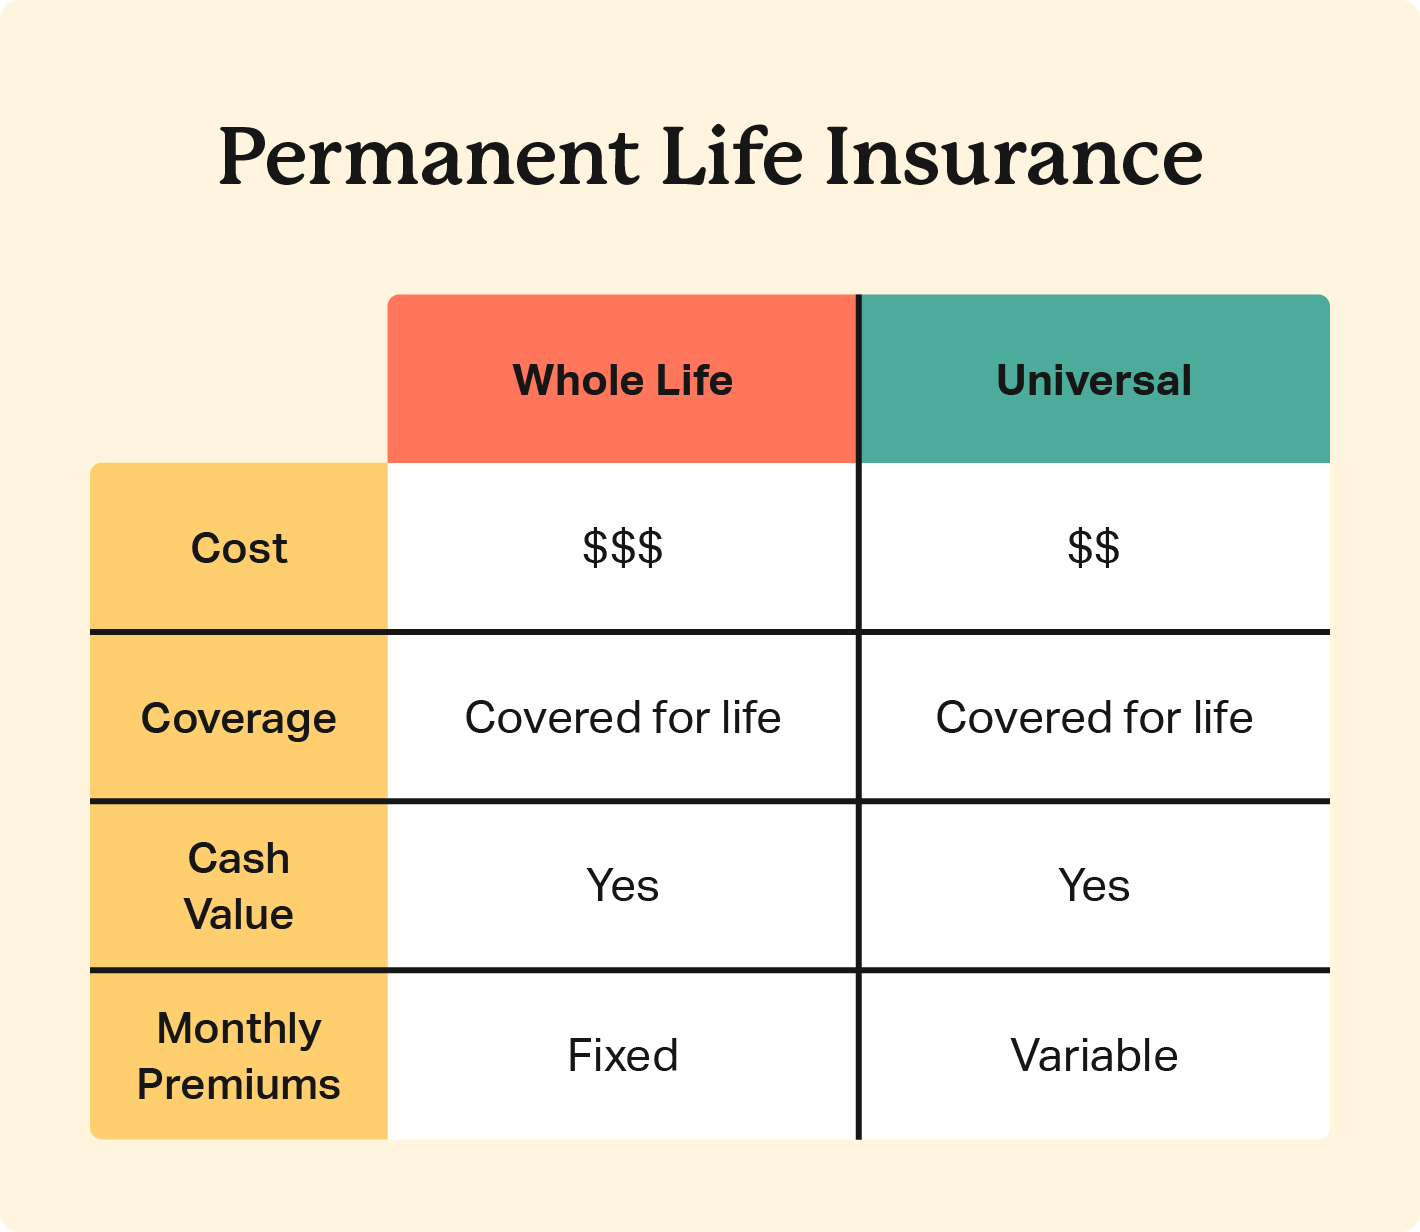 Table compares permanent life insurance policies, including whole life and universal.